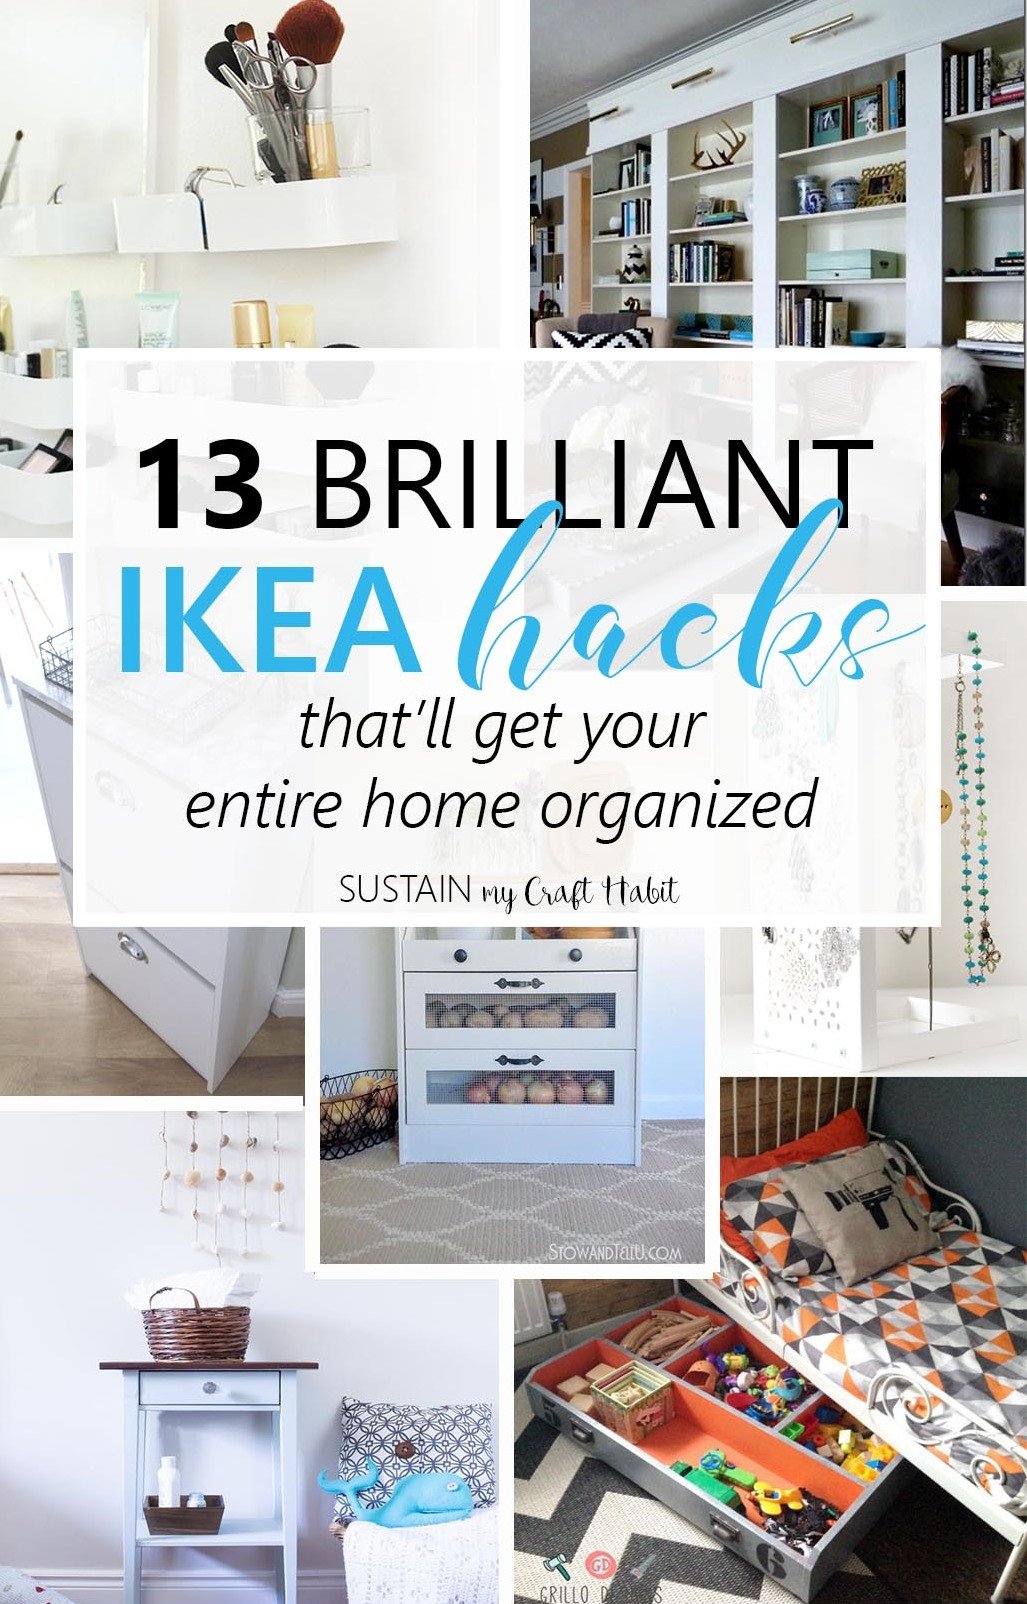 13 clever repurposing and upcycling ideas for your IKEA furniture | IKEA hack ideas to help with home organization